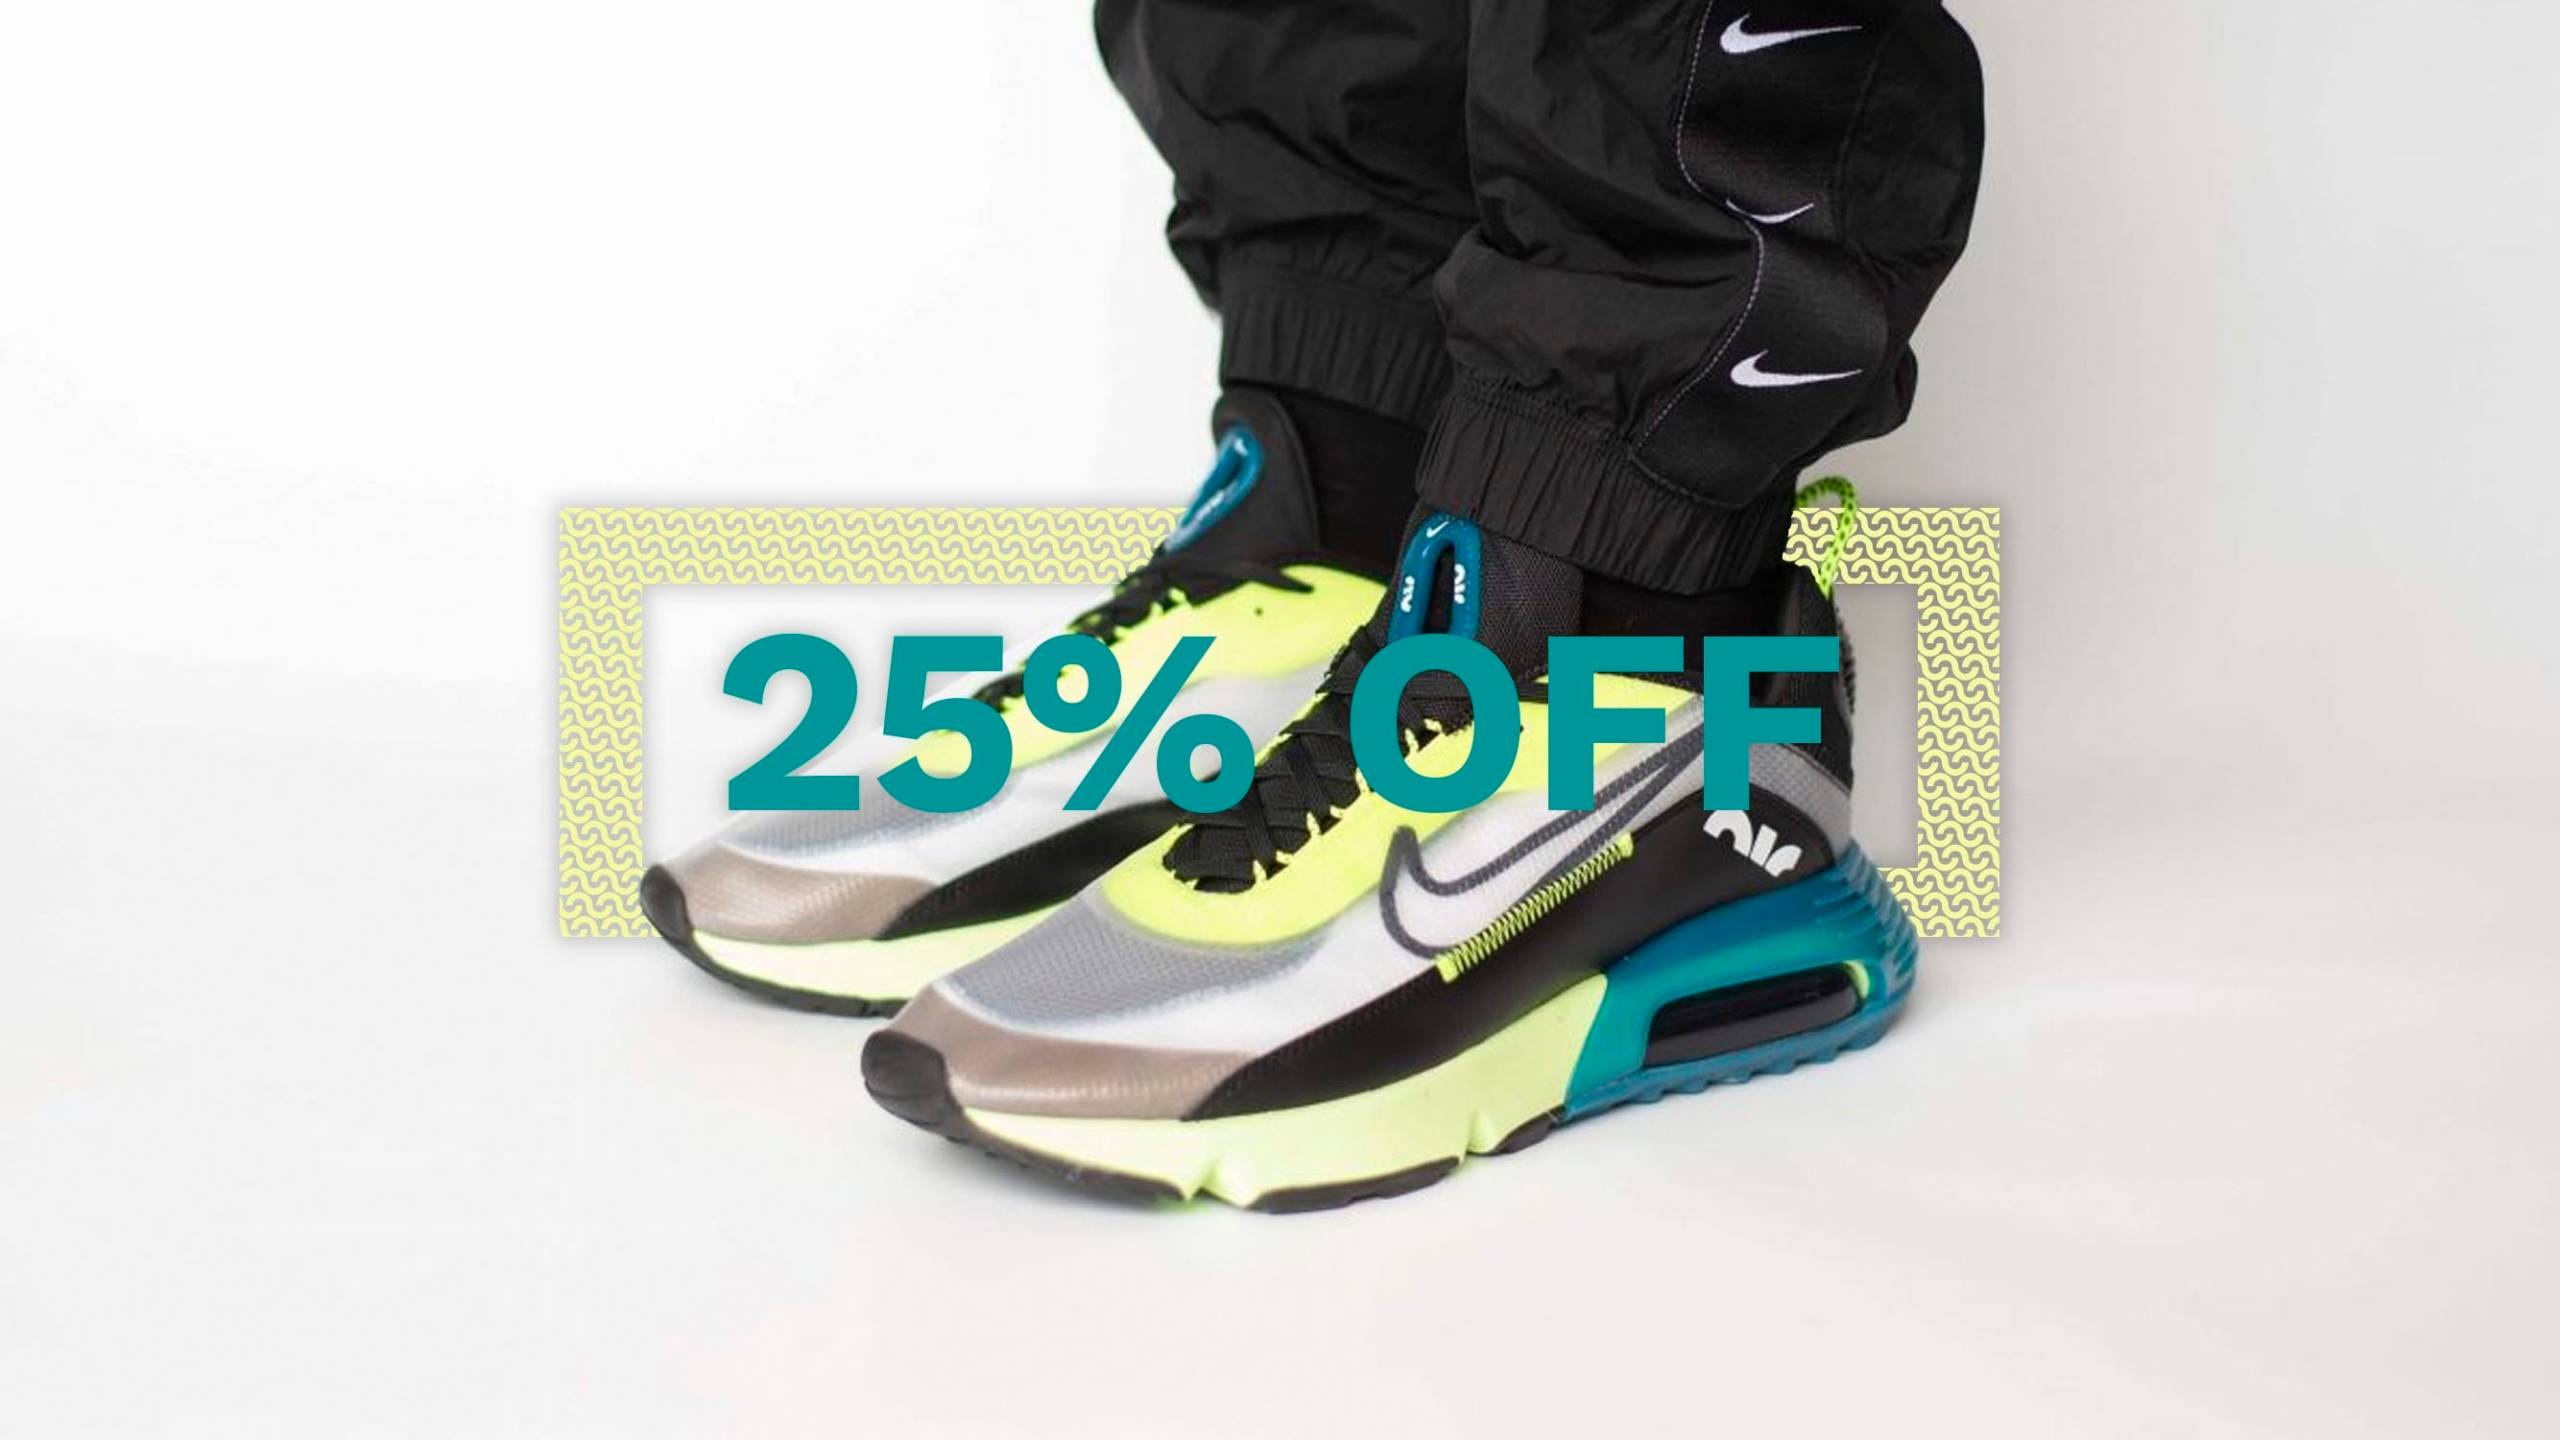 FLASH SALE: Grab These 8 Best-Selling Nike Air 2090s With 25% | The Sole Supplier